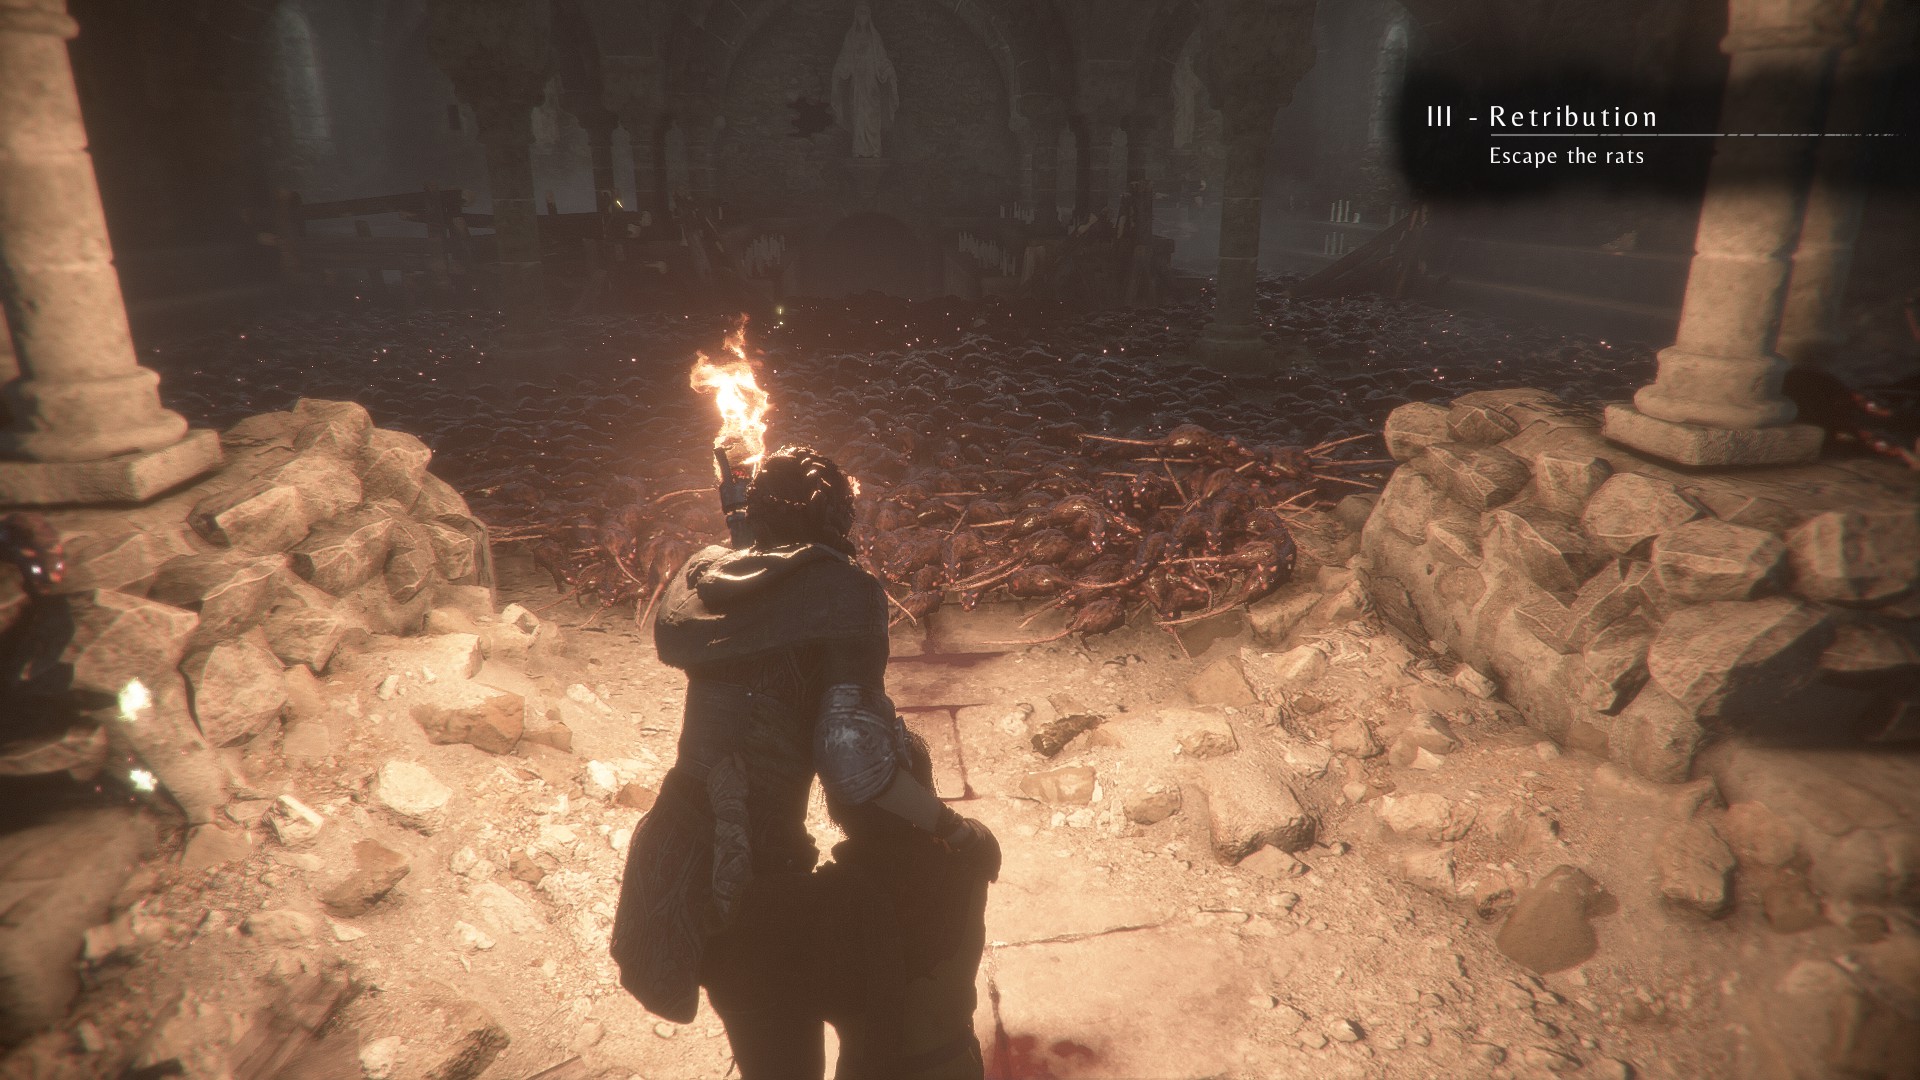 A Plague Tale: Innocence is shaping up to be a gripping